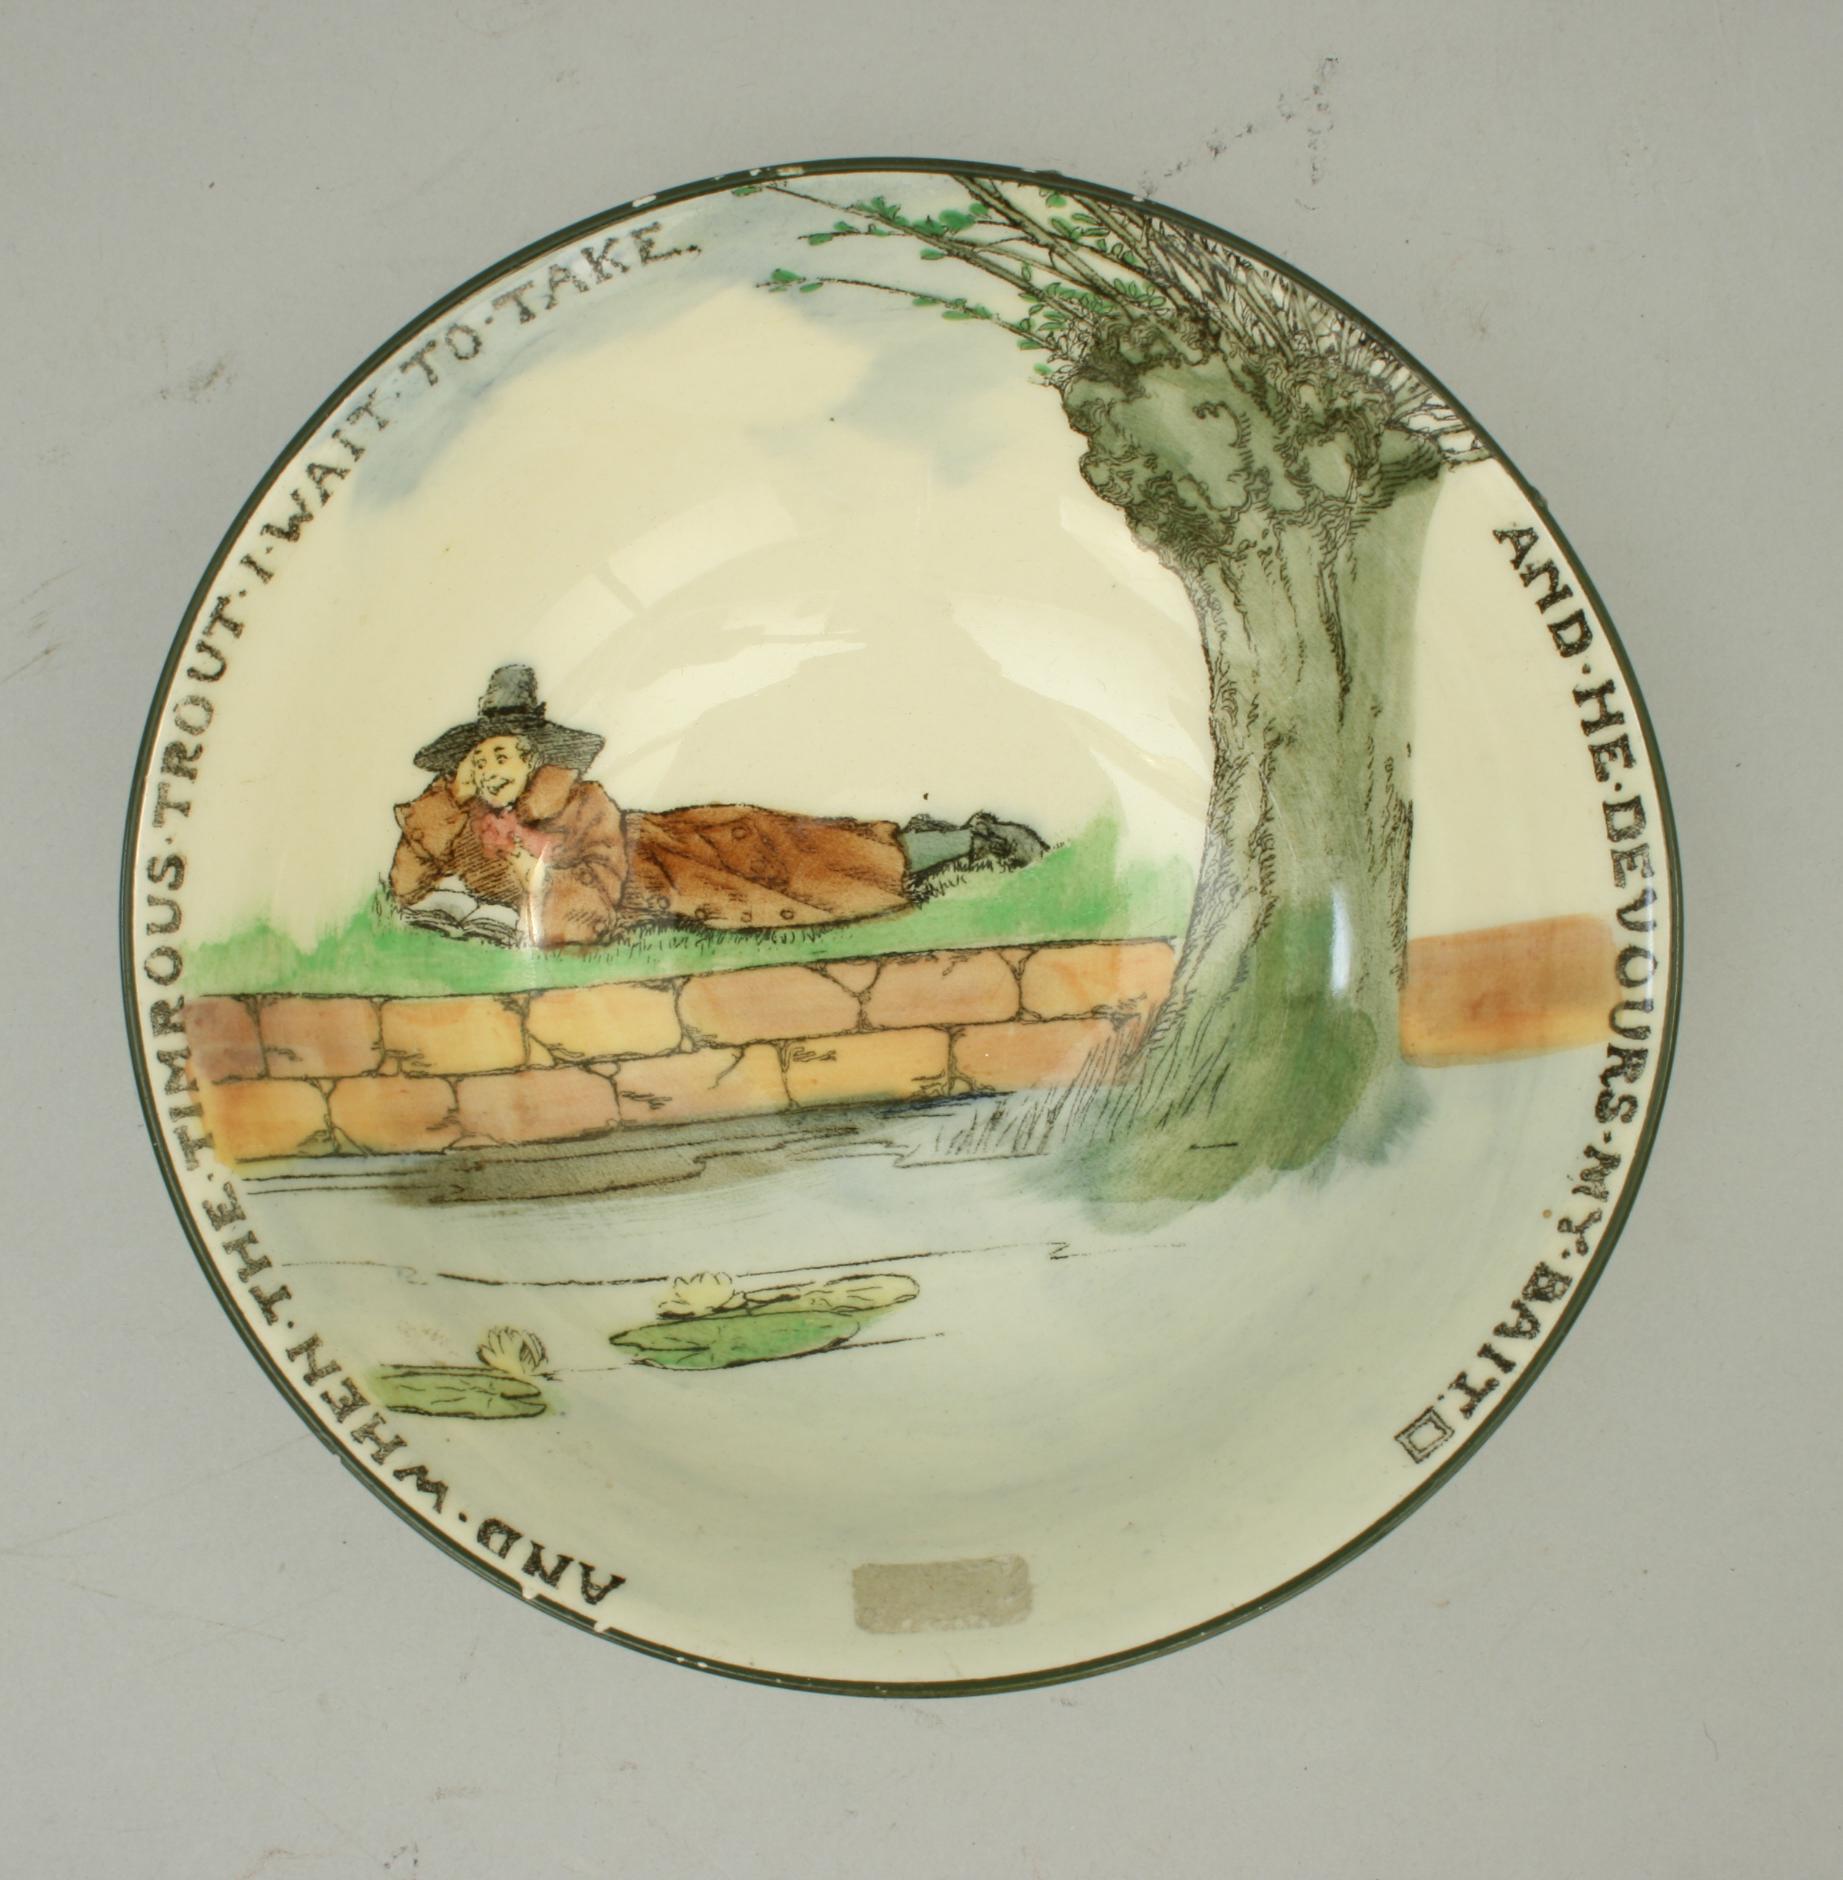 Vintage Royal Doulton fishing Ceramic.
A Royal Doulton Series Ware 'The Gallant Fishers' fishing bowl. The bowl is with a polychrome fishing scene of a fisherman lying on the river bank reading a book. The inscription around the edge reads 'And